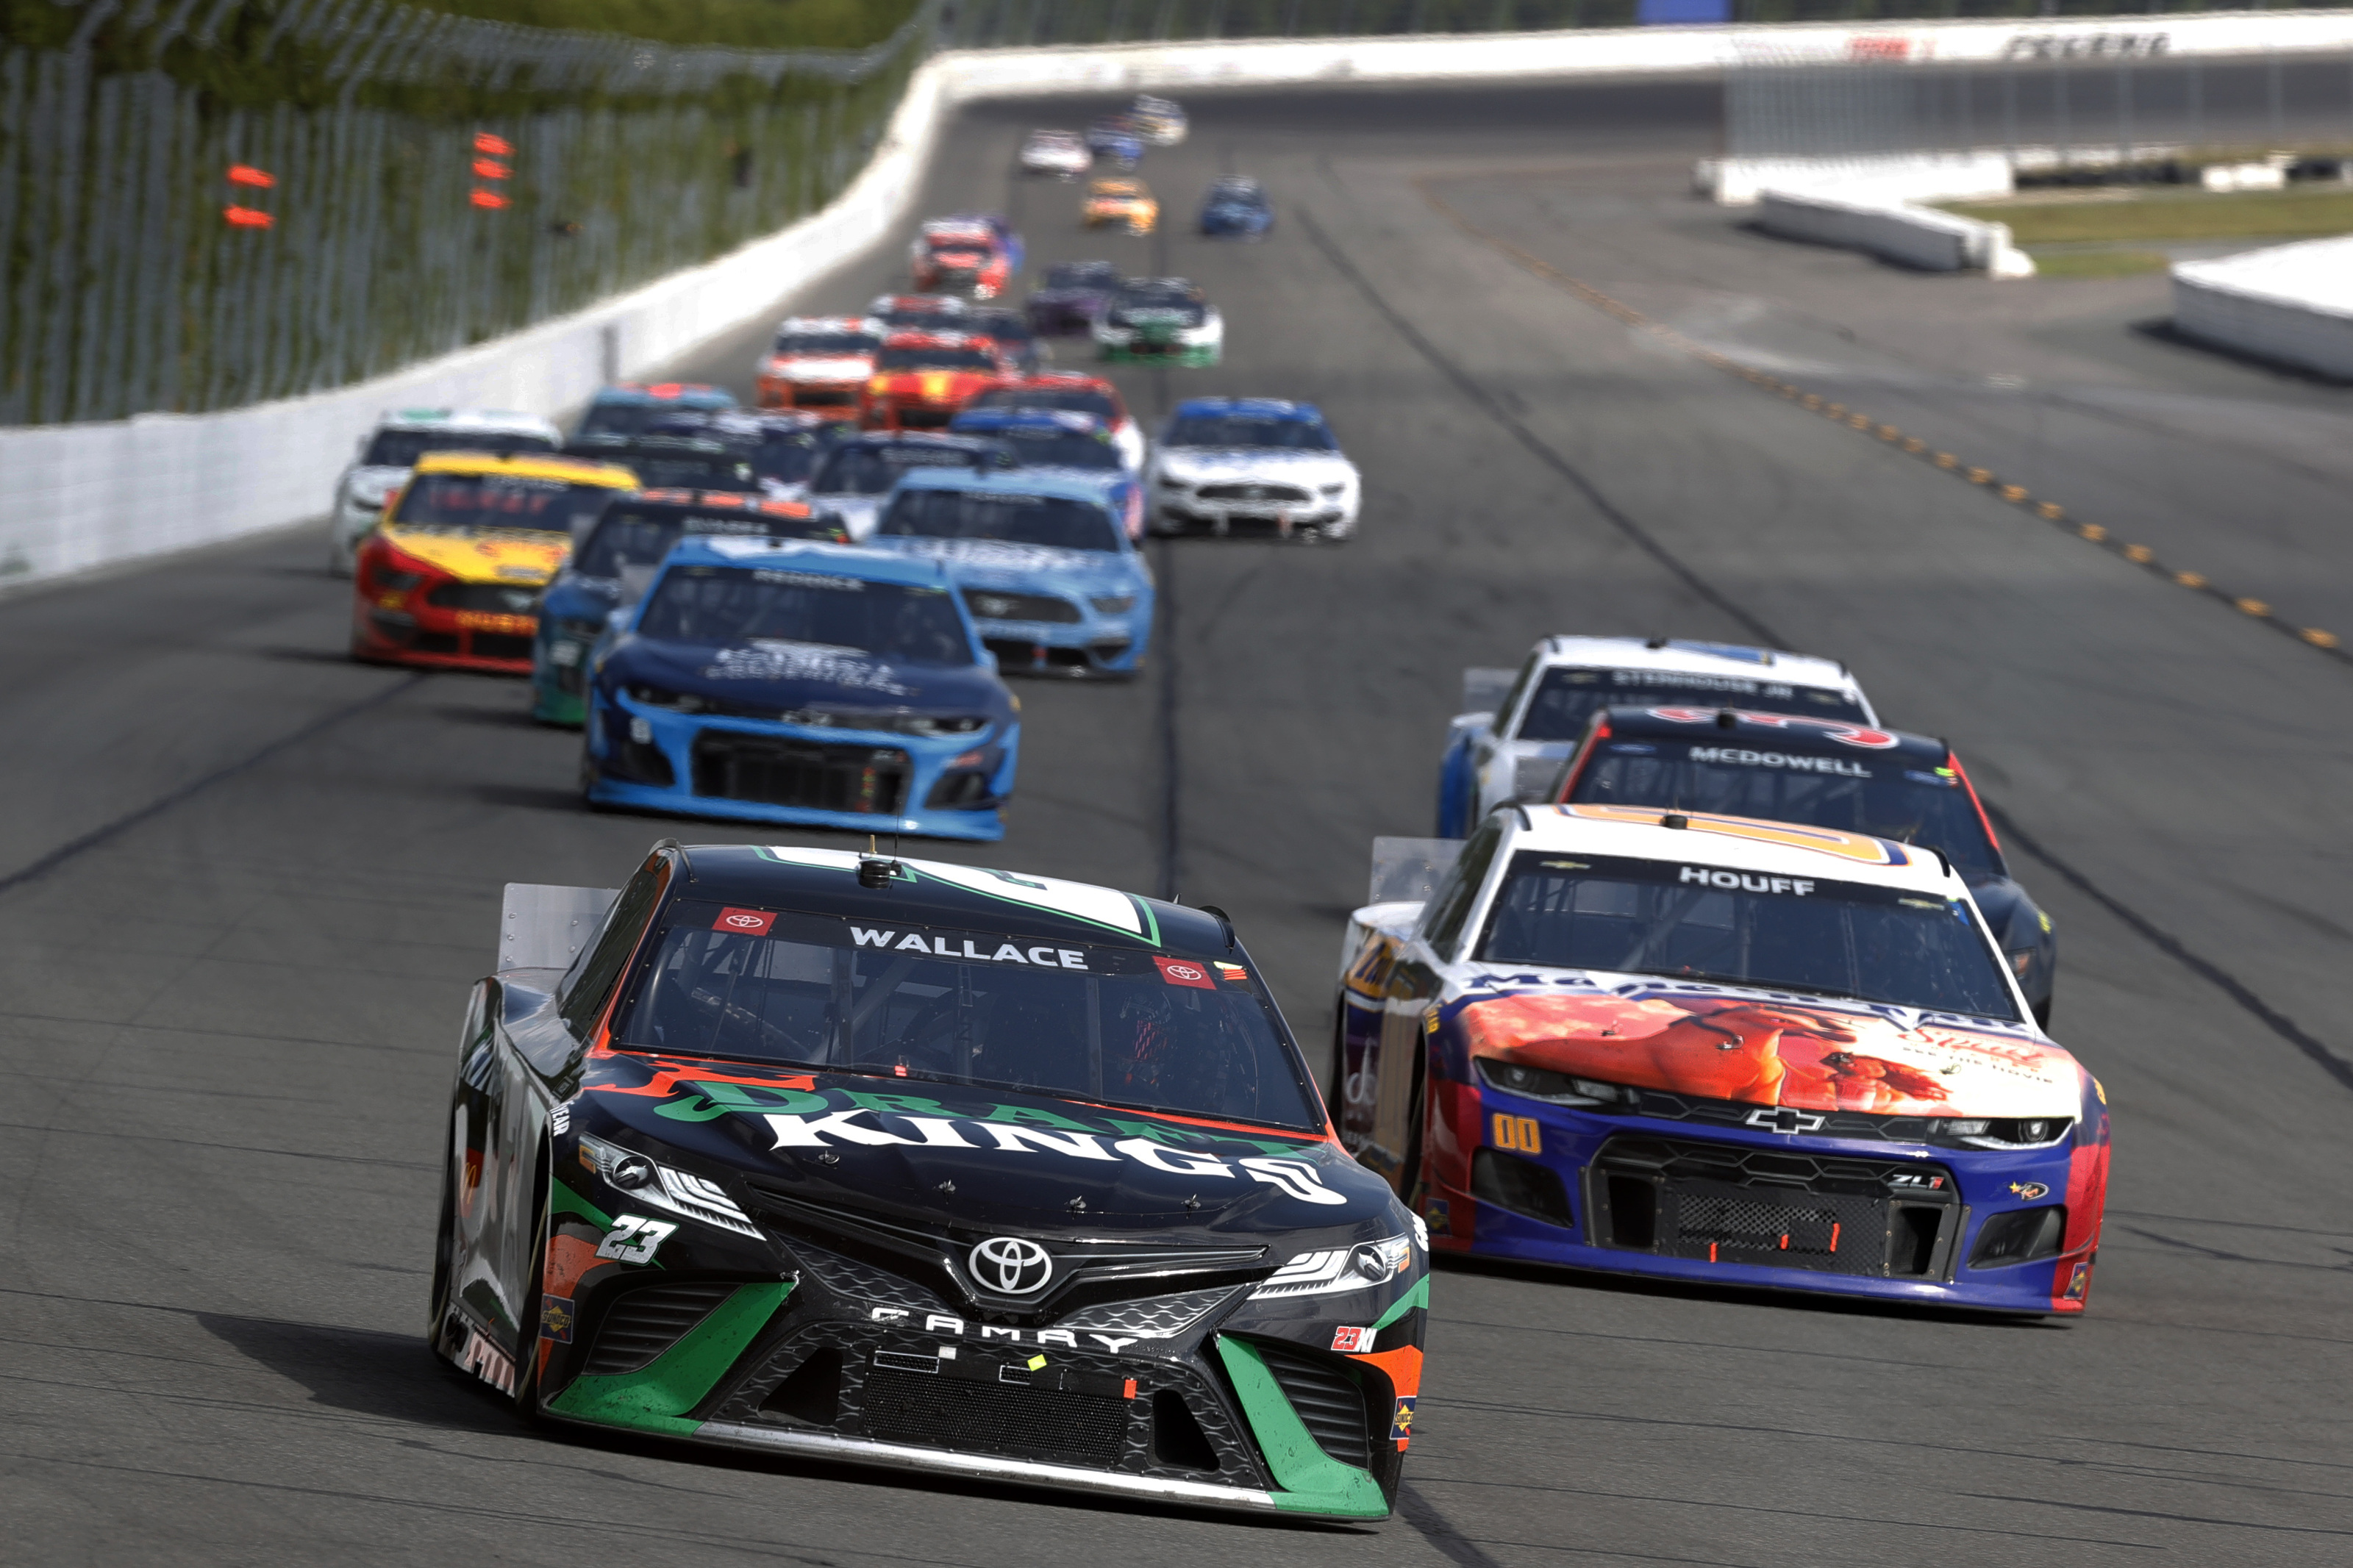 NASCAR Pocono race marks a Cup Series first in 41 years